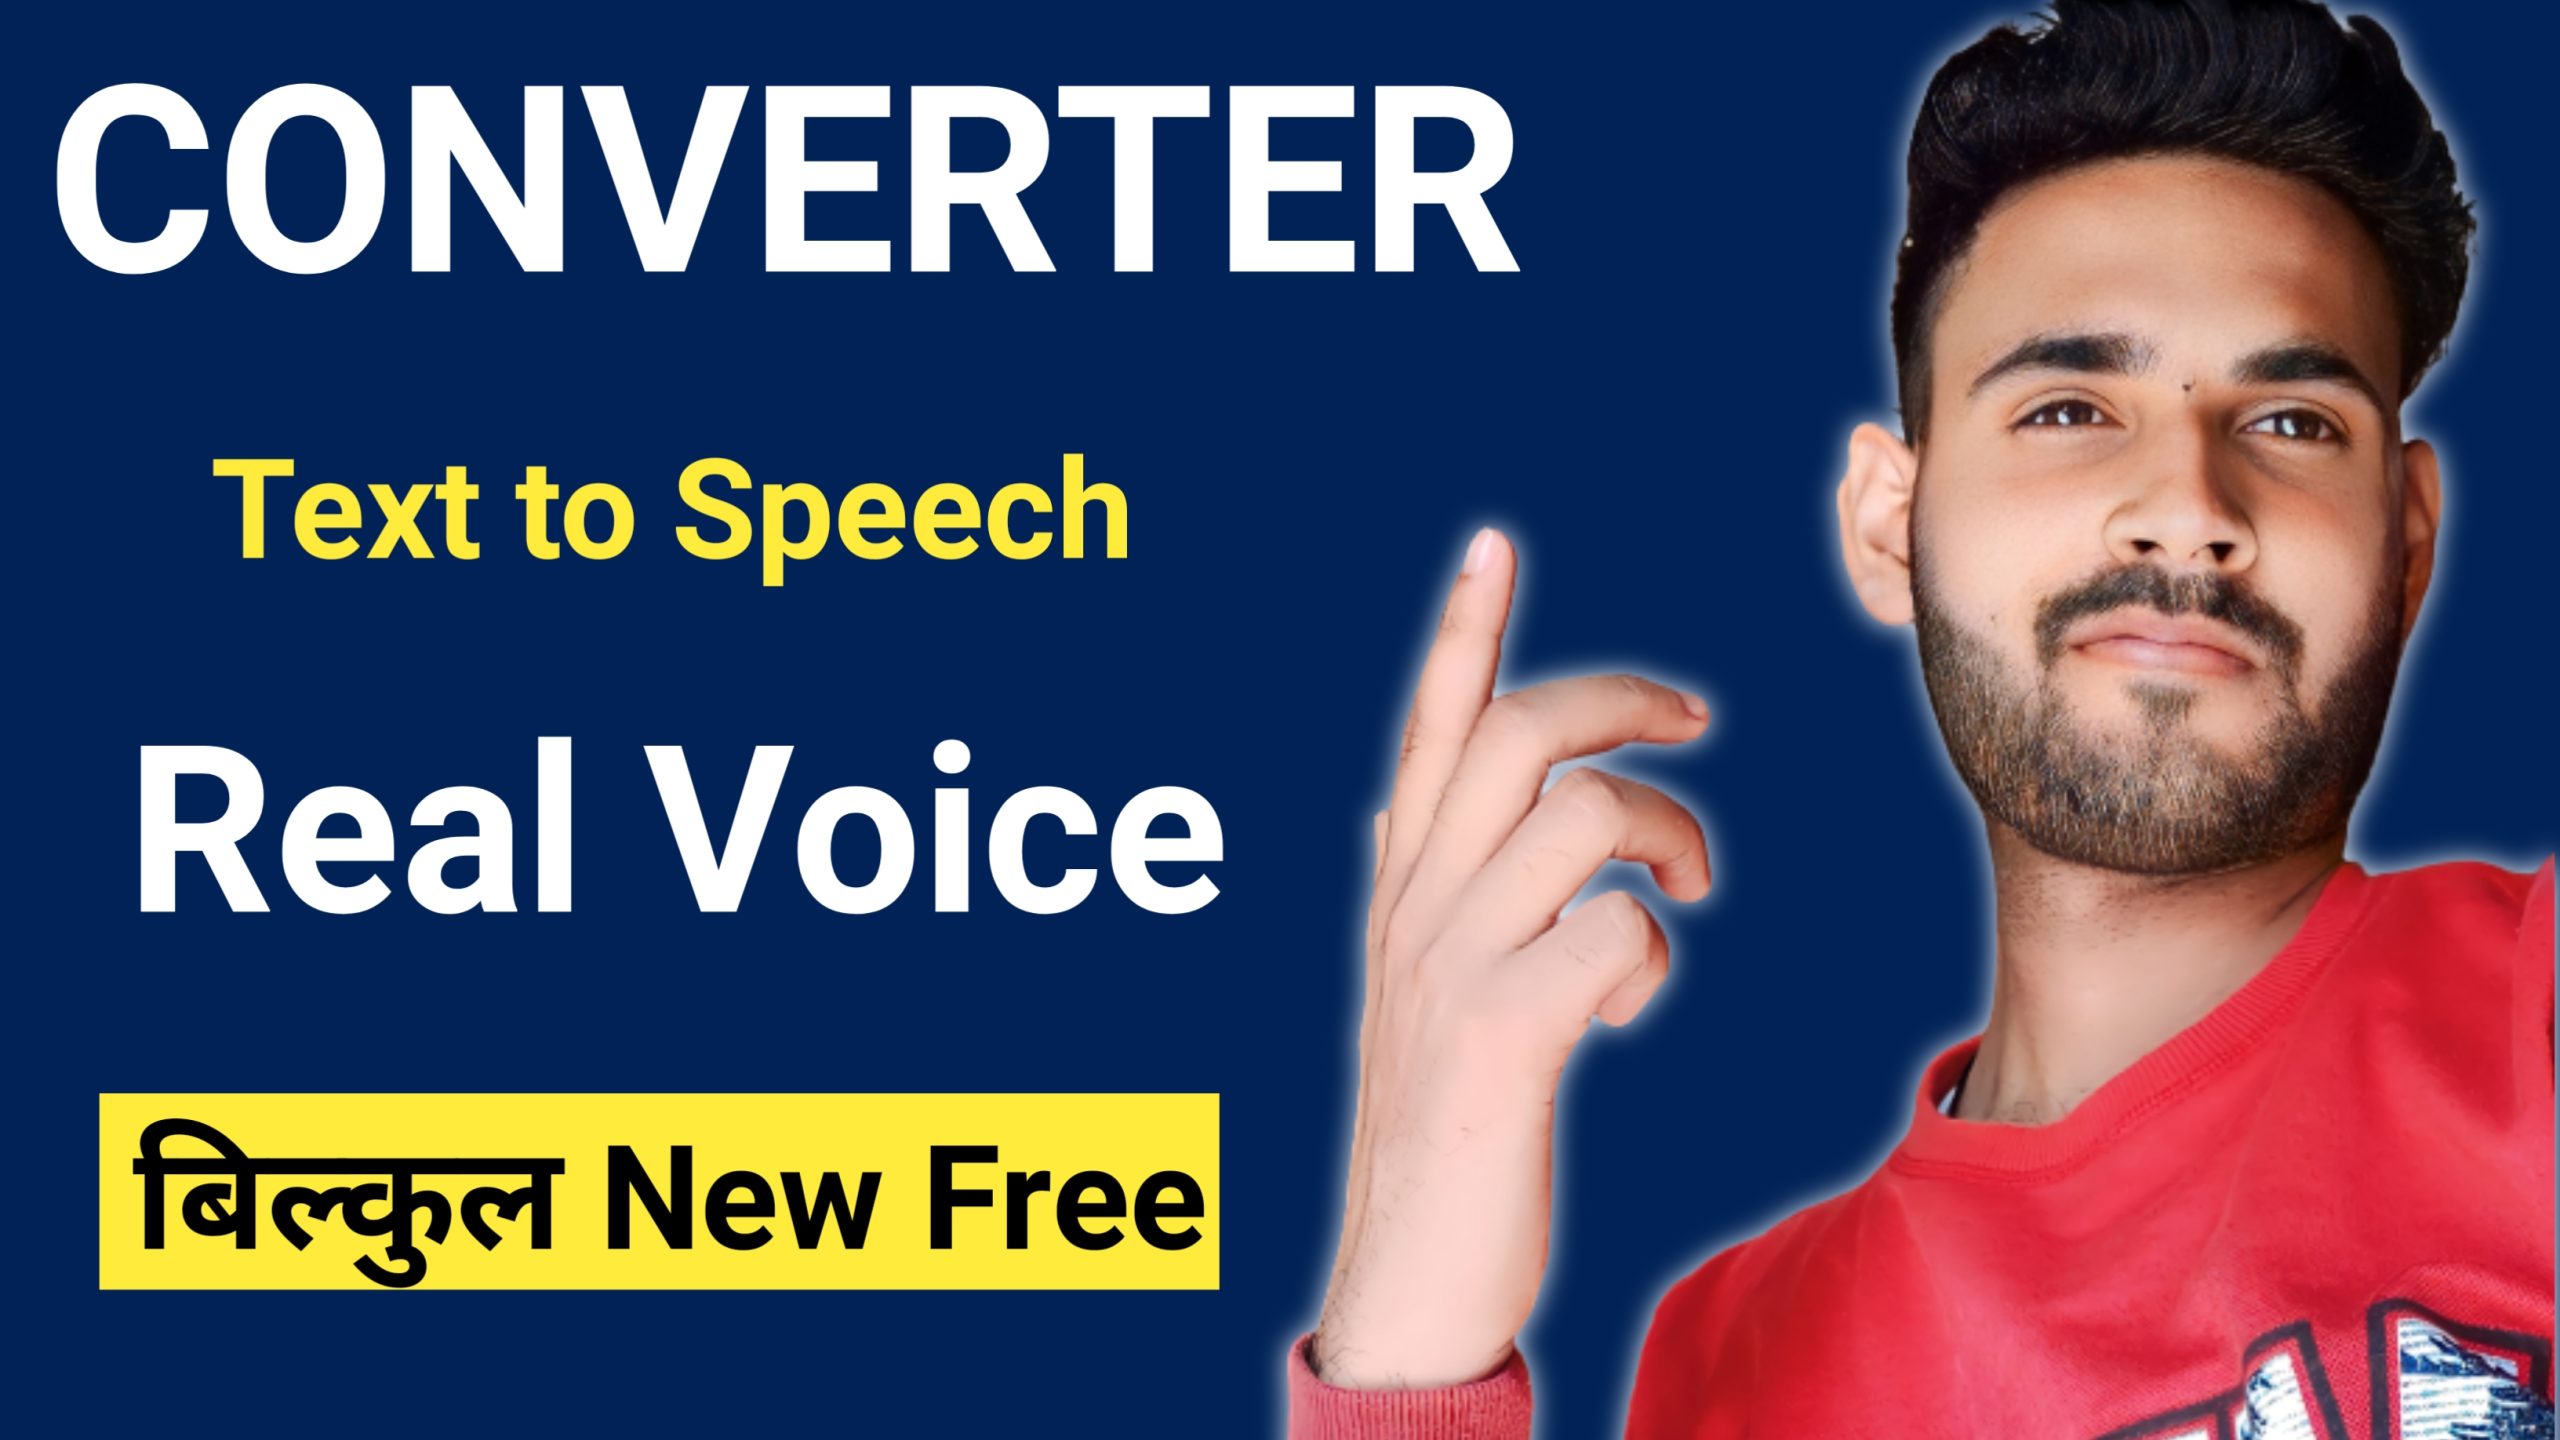 Best Free Text to Speech Converter For PC | Convert Text to Speech in Real Voice?